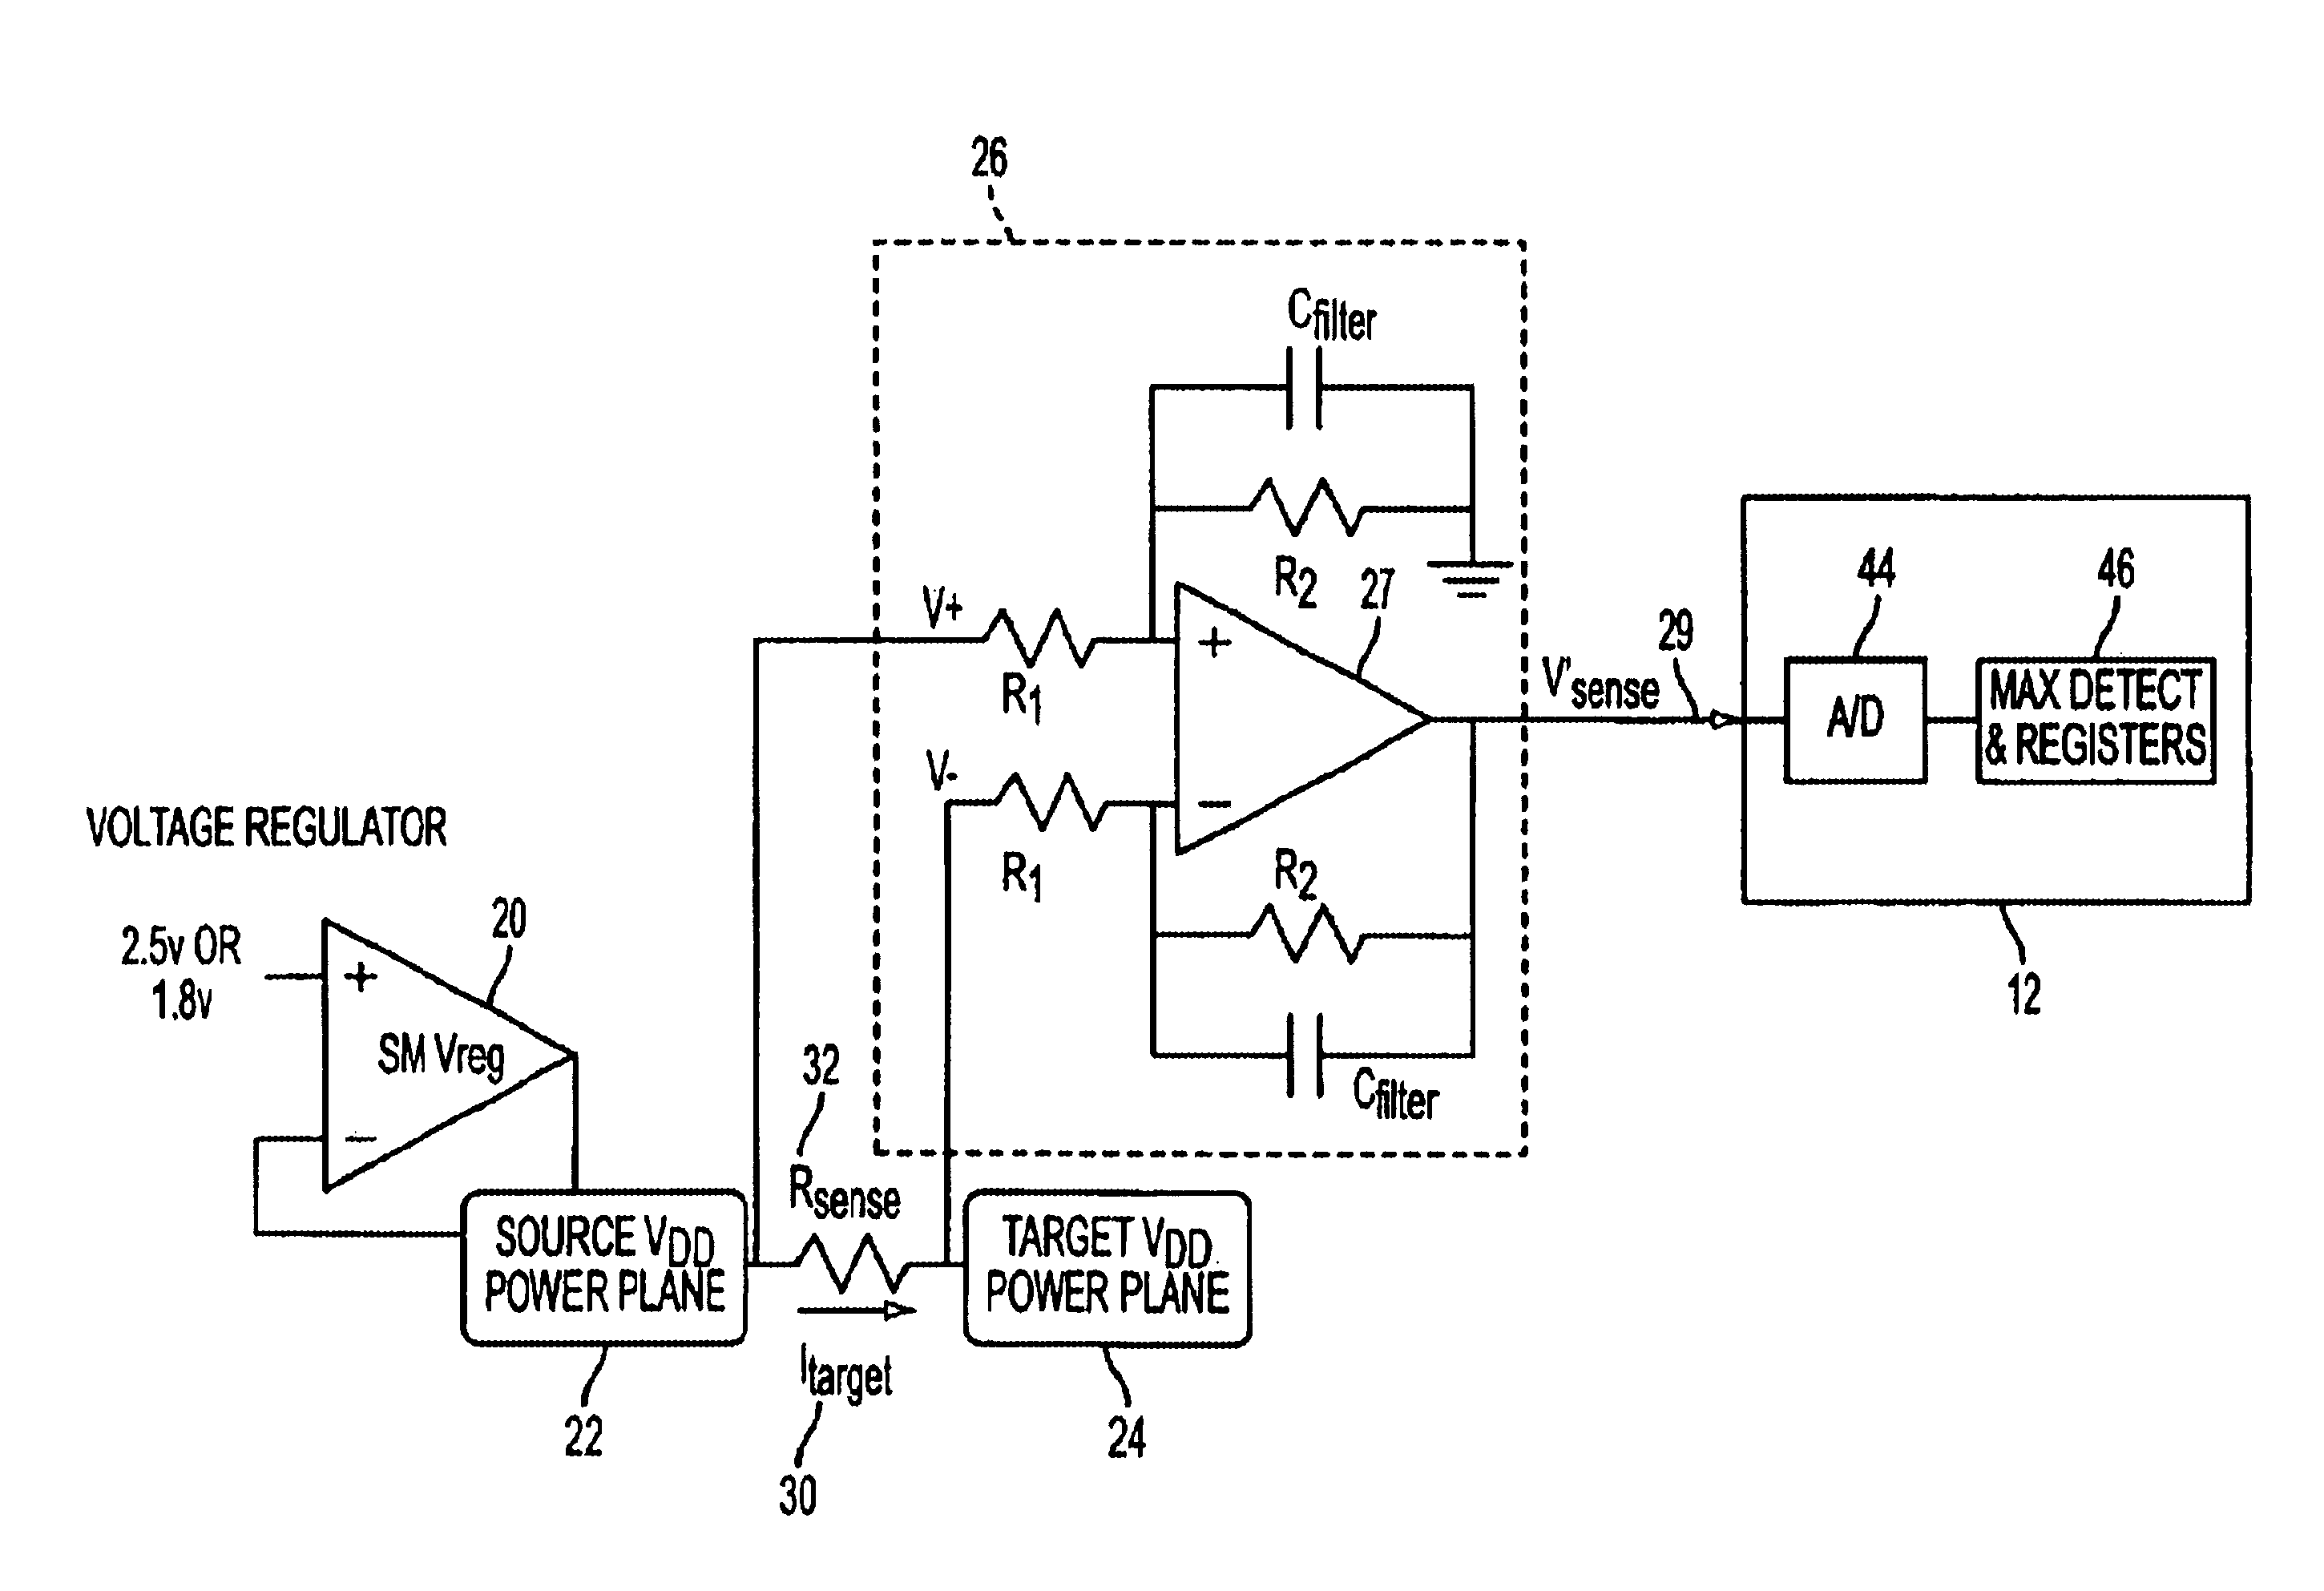 Memory system that measures power consumption